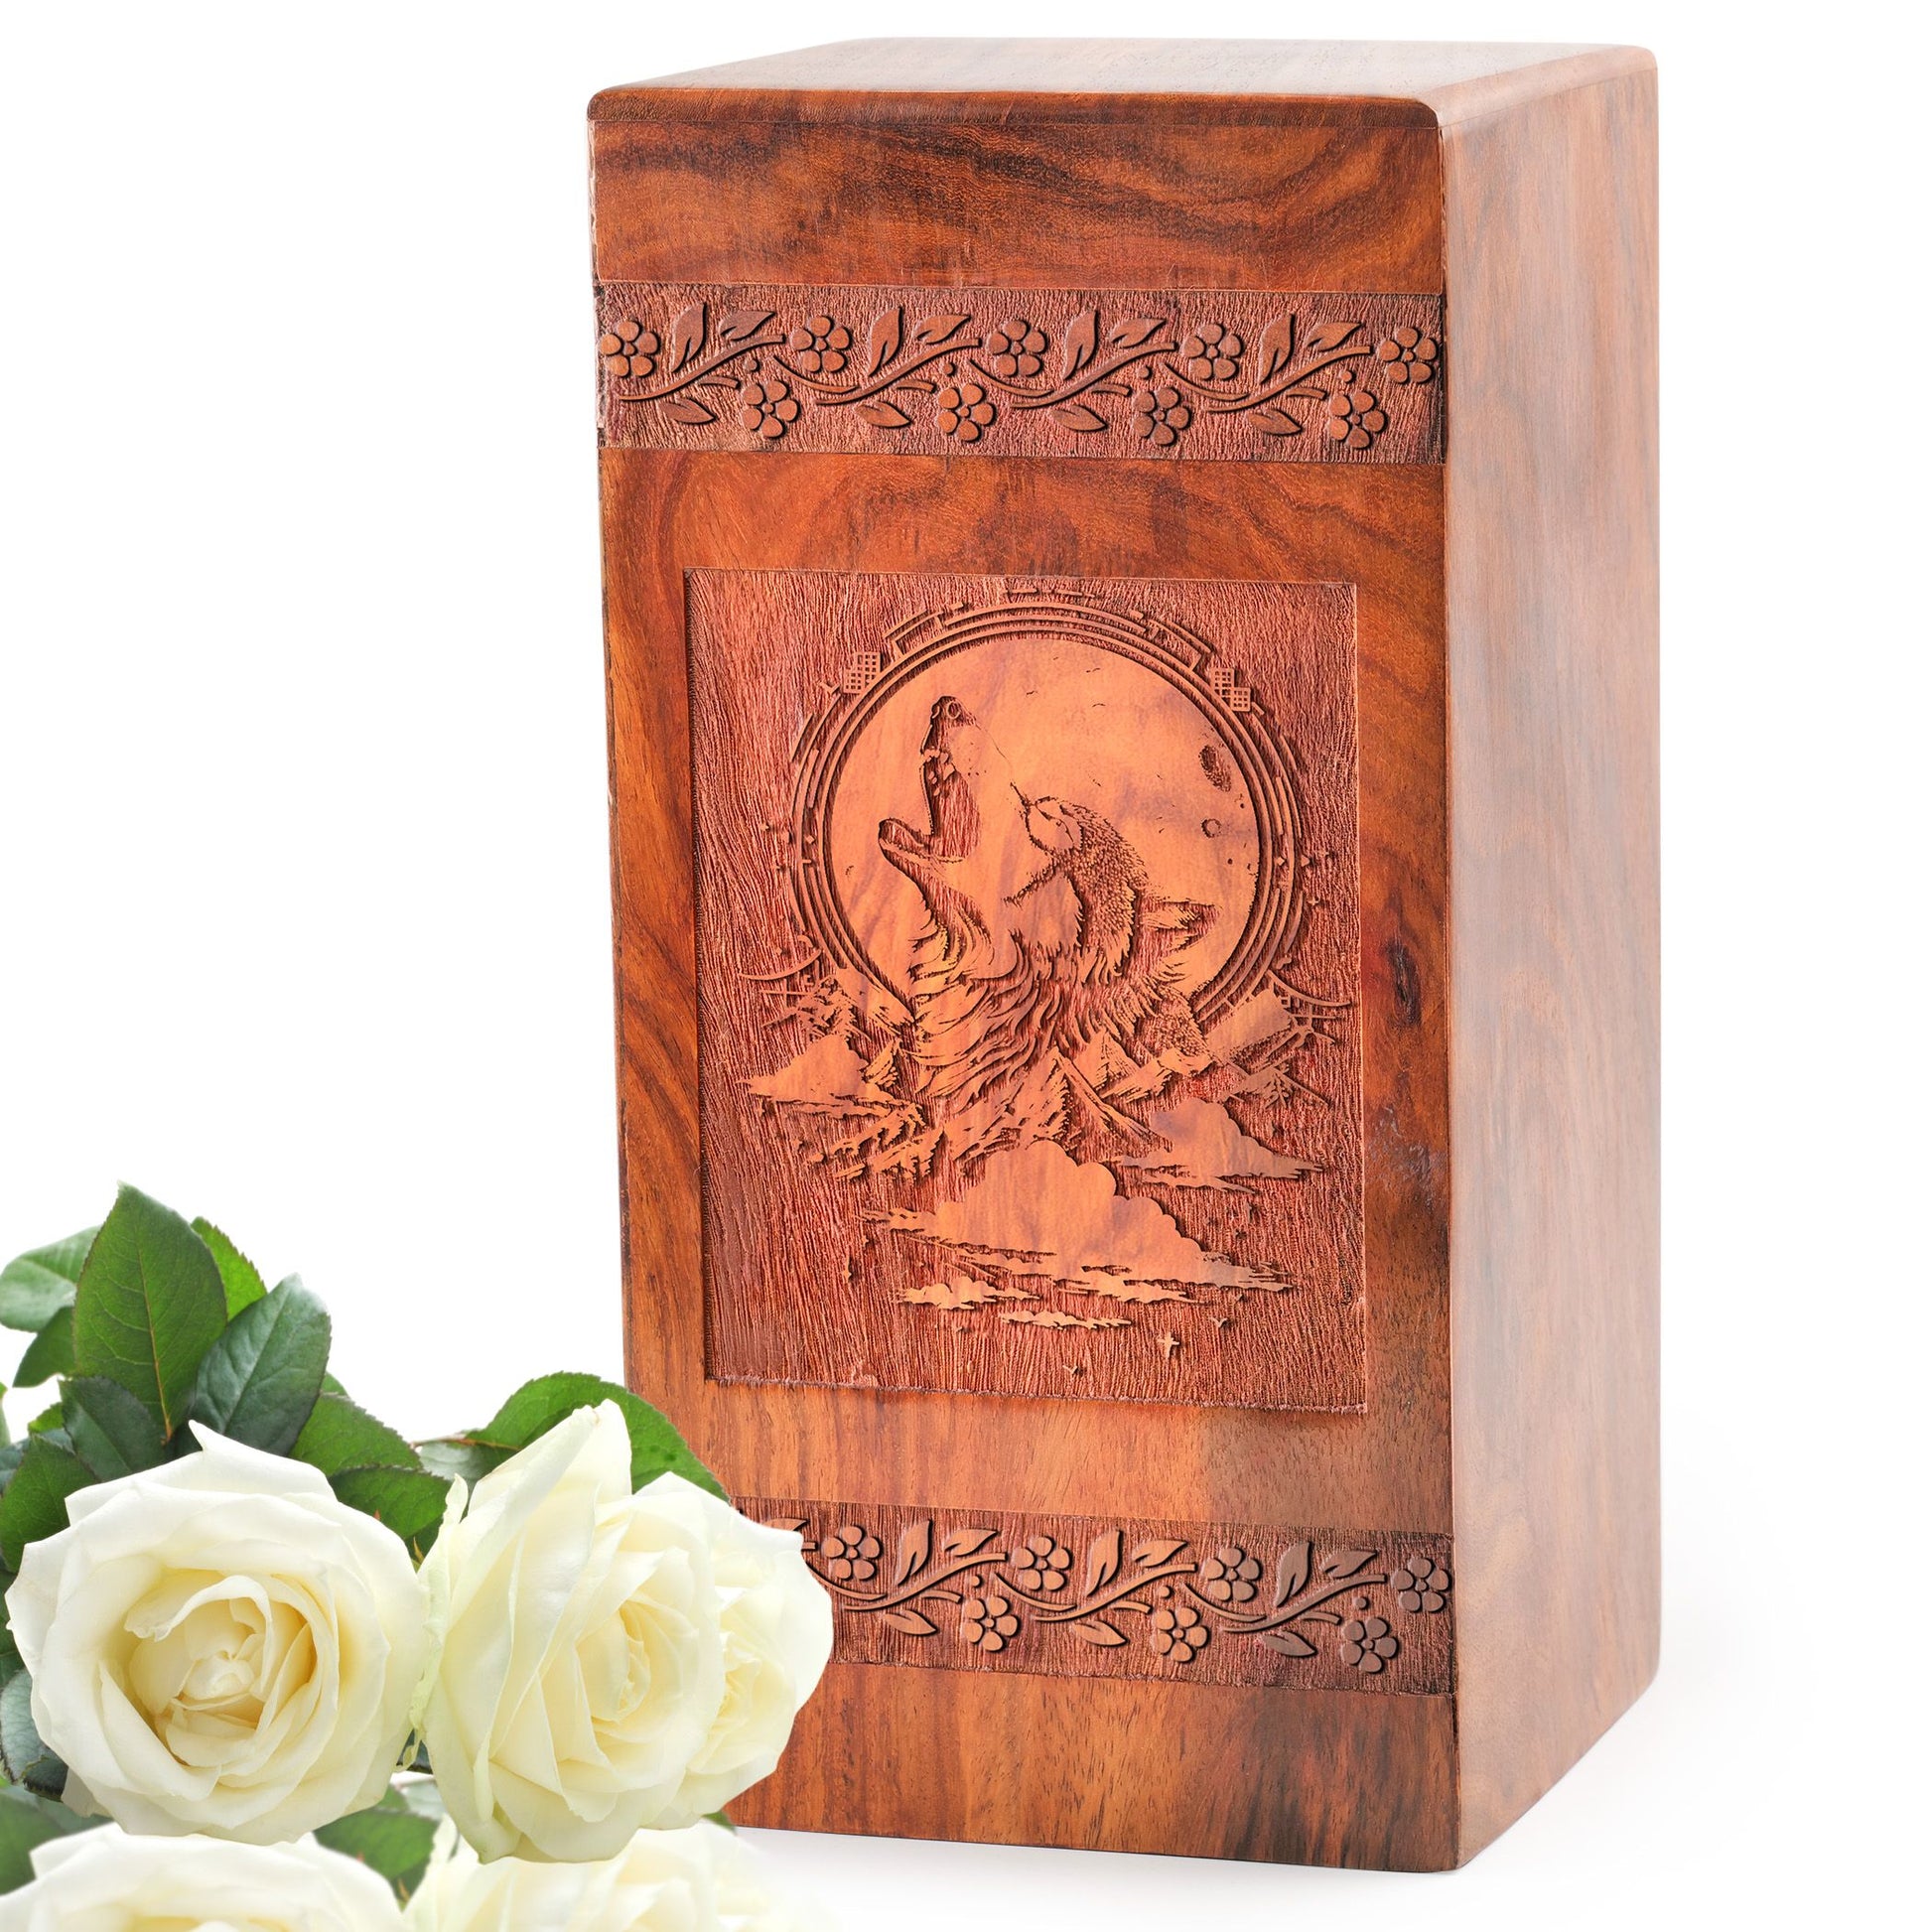 Unique Wolf Wooden Cremation Urn | Eternal Peace Memorial Urn For Ashes